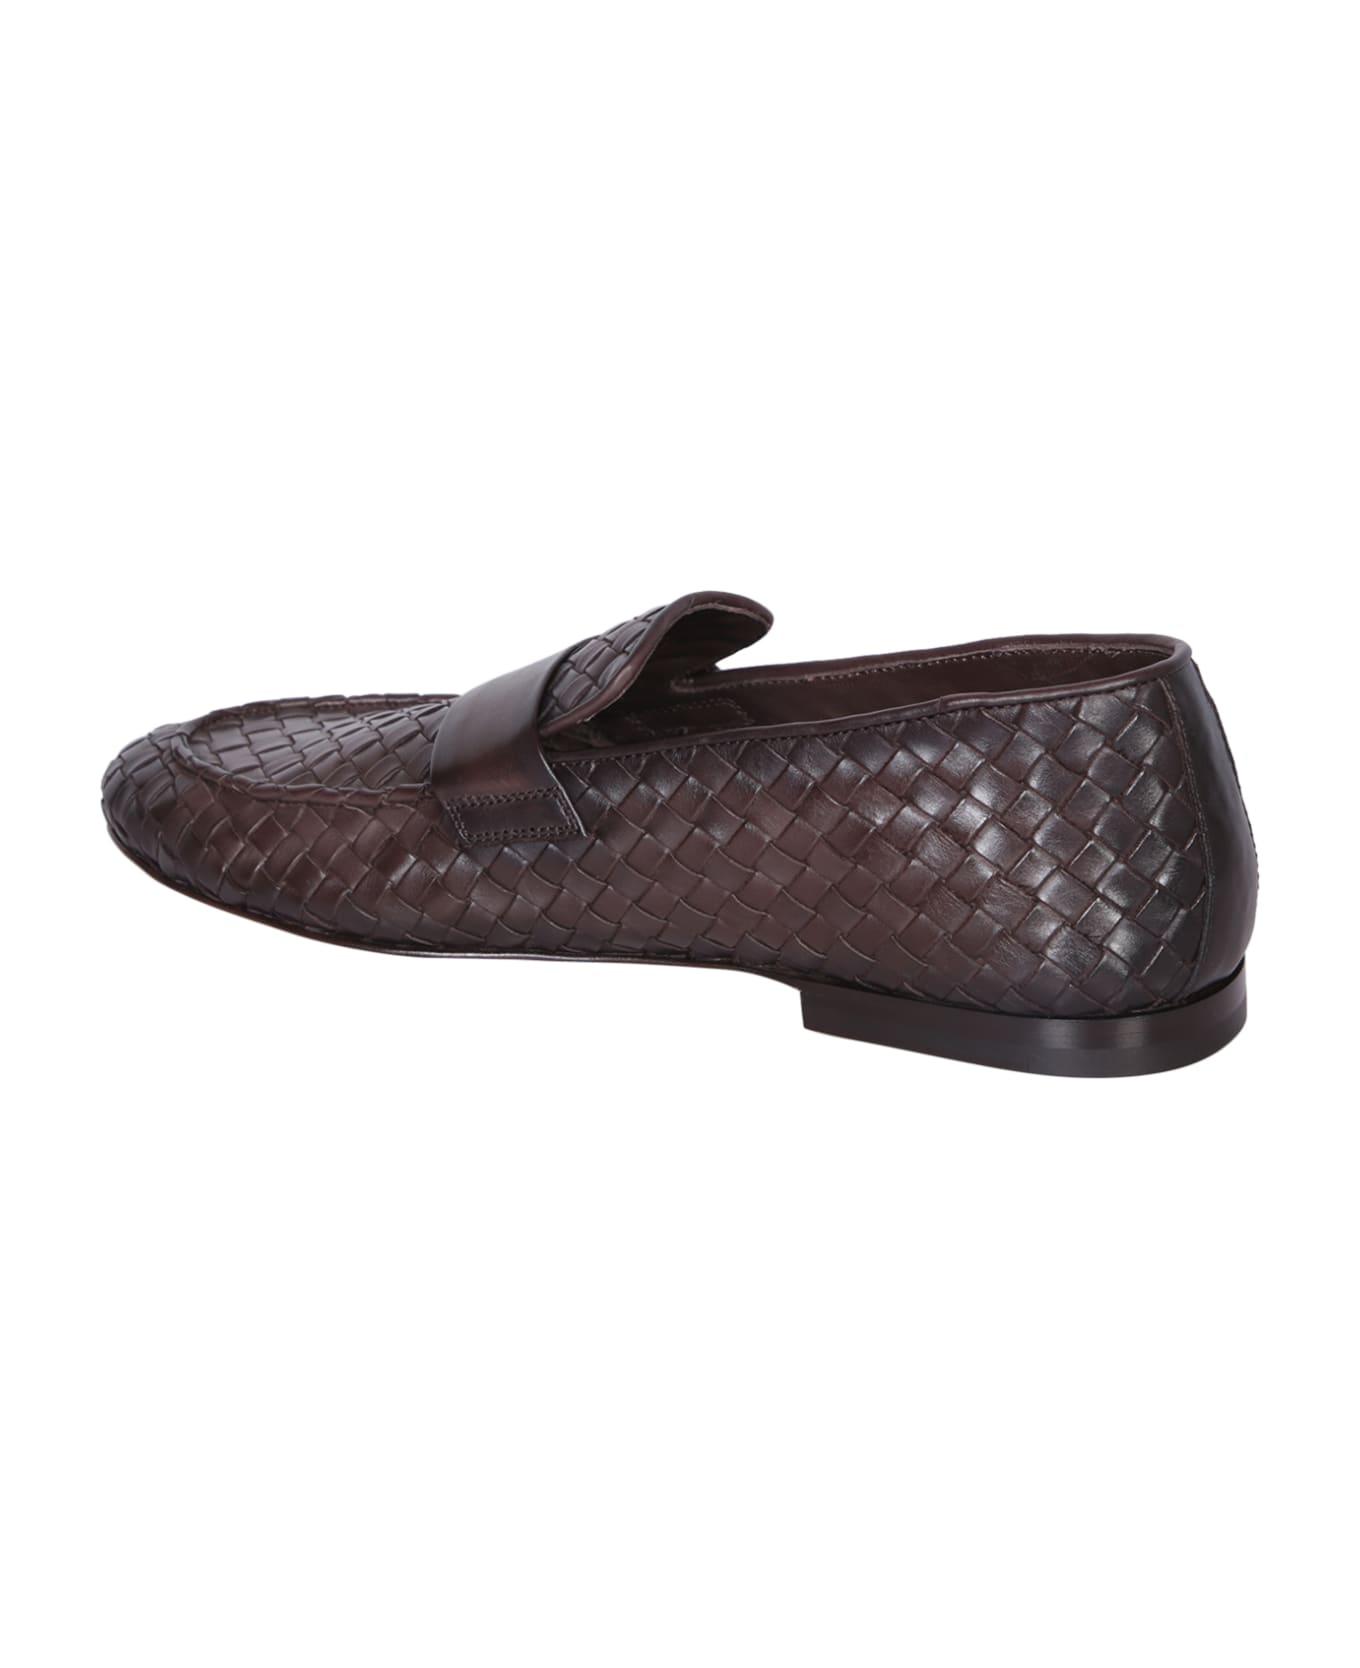 Officine Creative Airto 011 Braided Brown Loafer - Brown